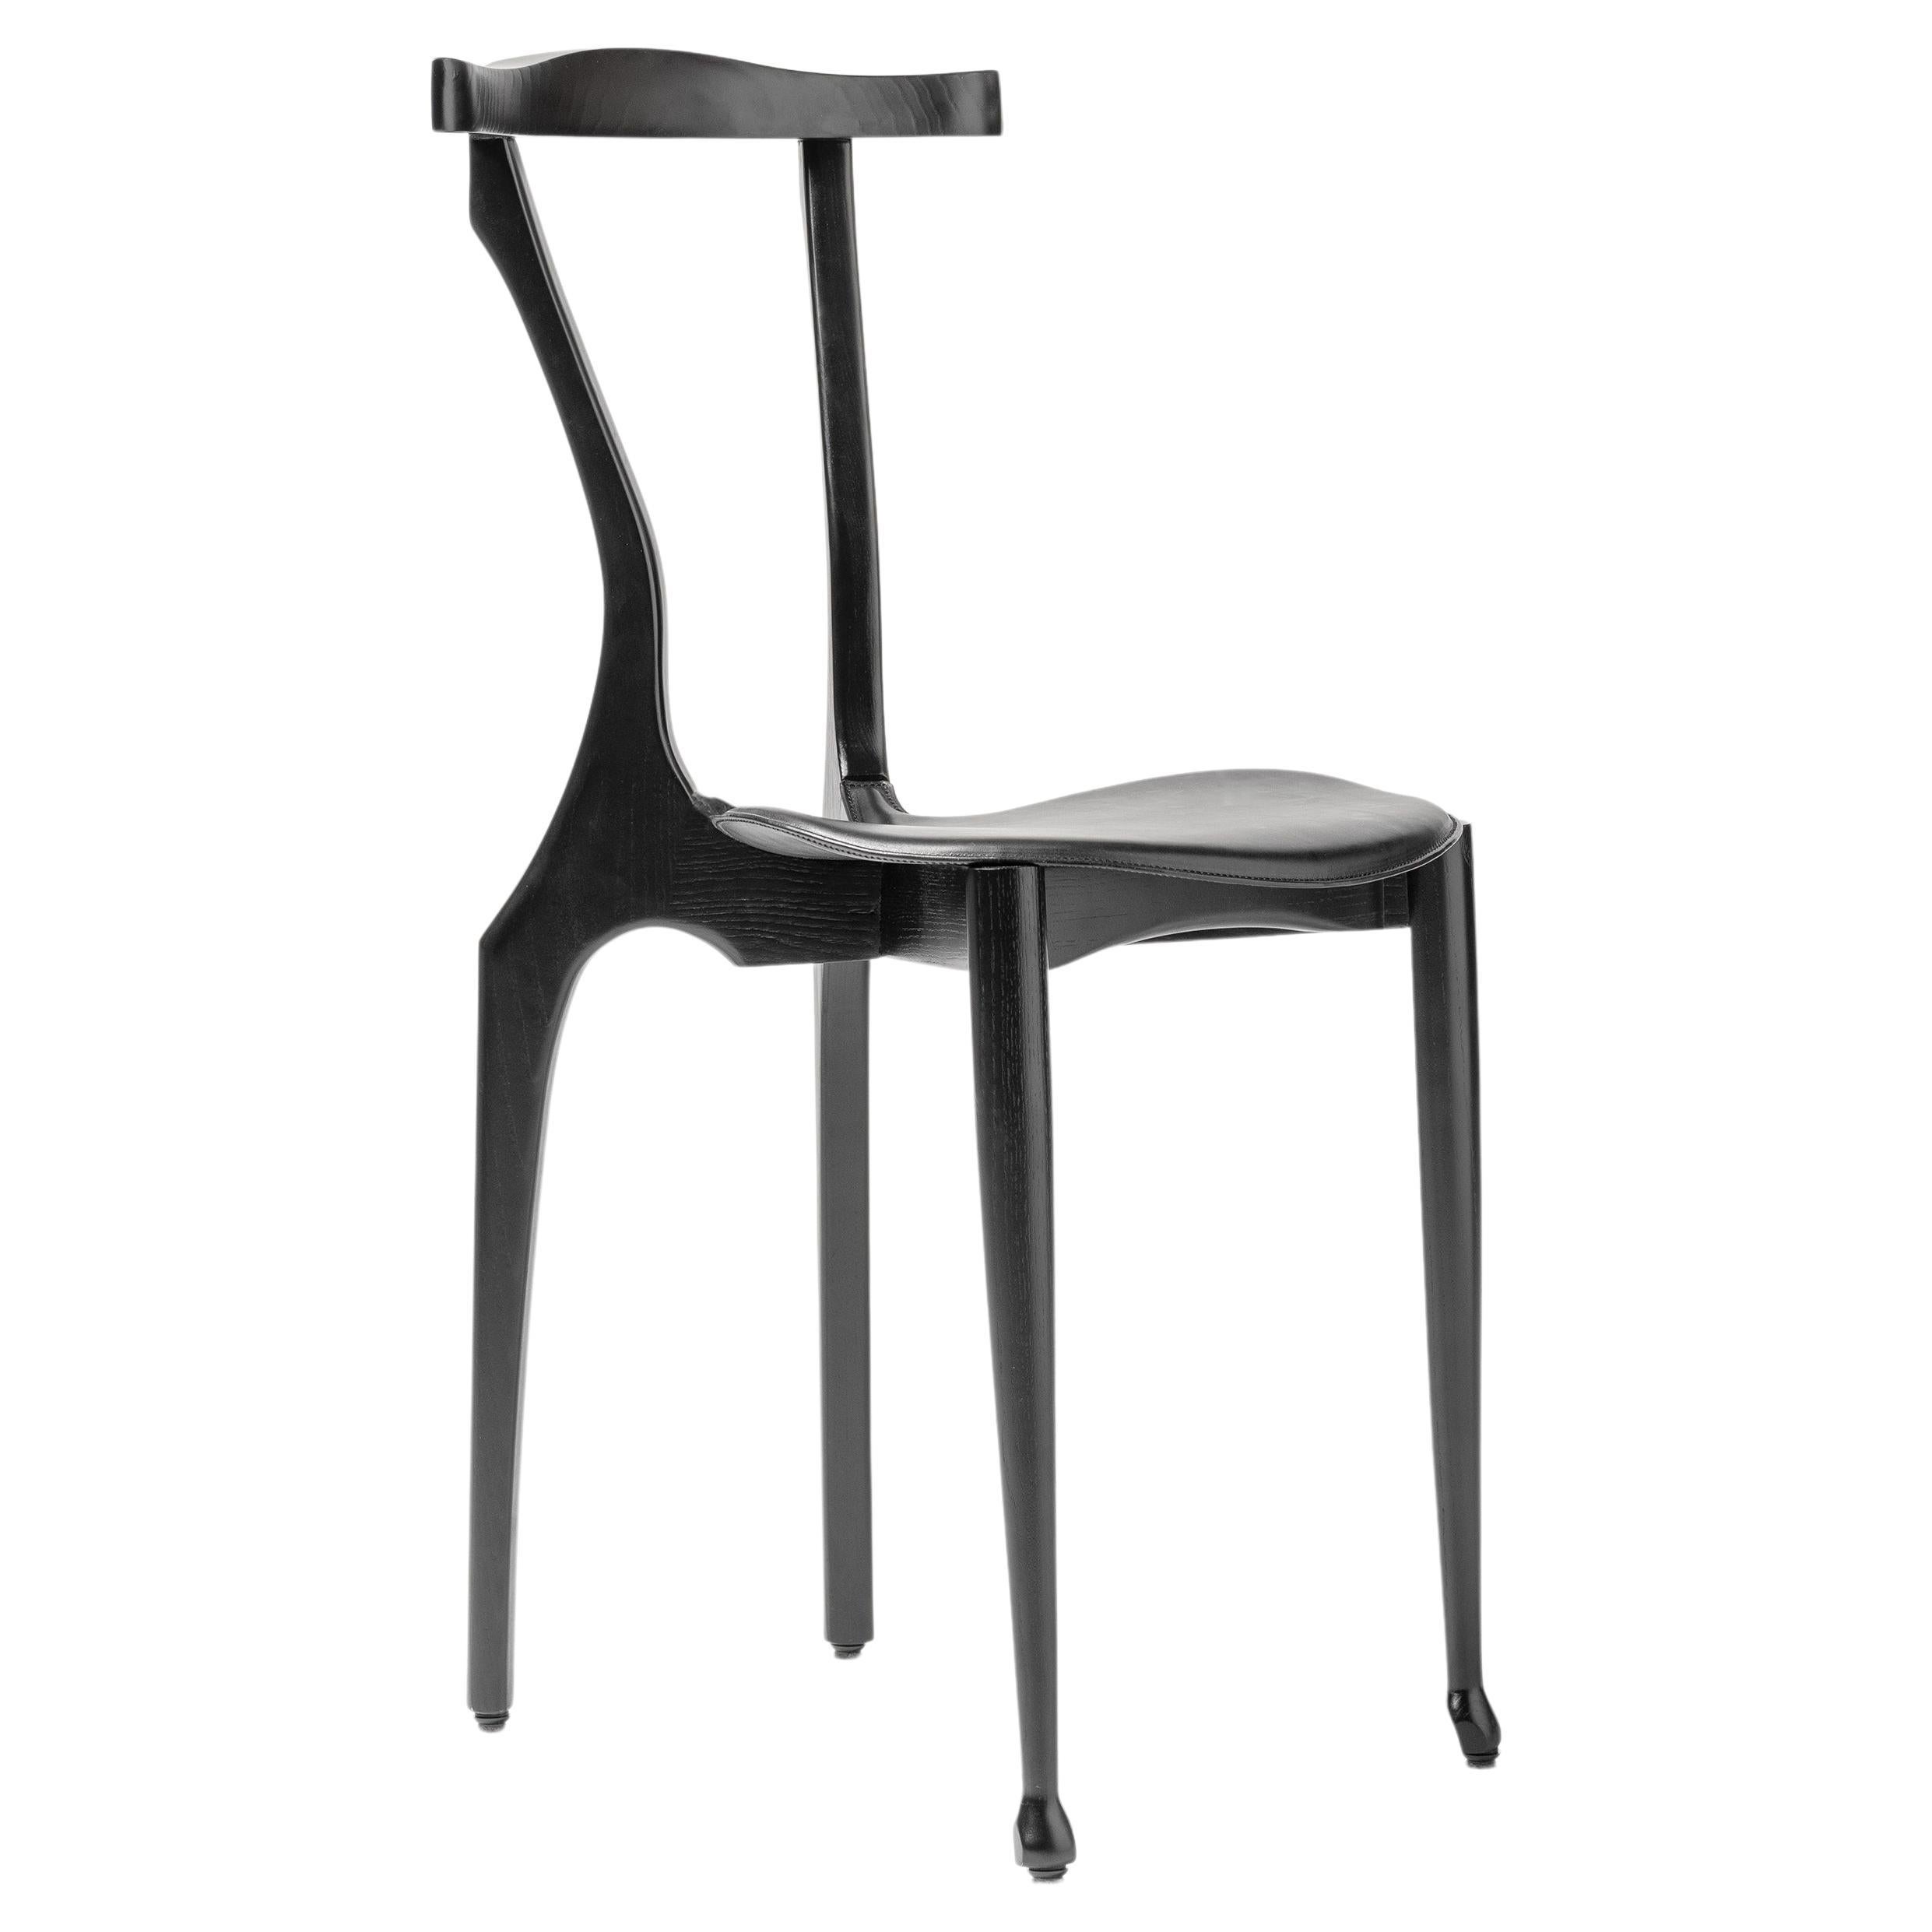 Black Lacquered Contemporary Gaulinetta Dining Chair by Oscar Tusquets, Gaulino 